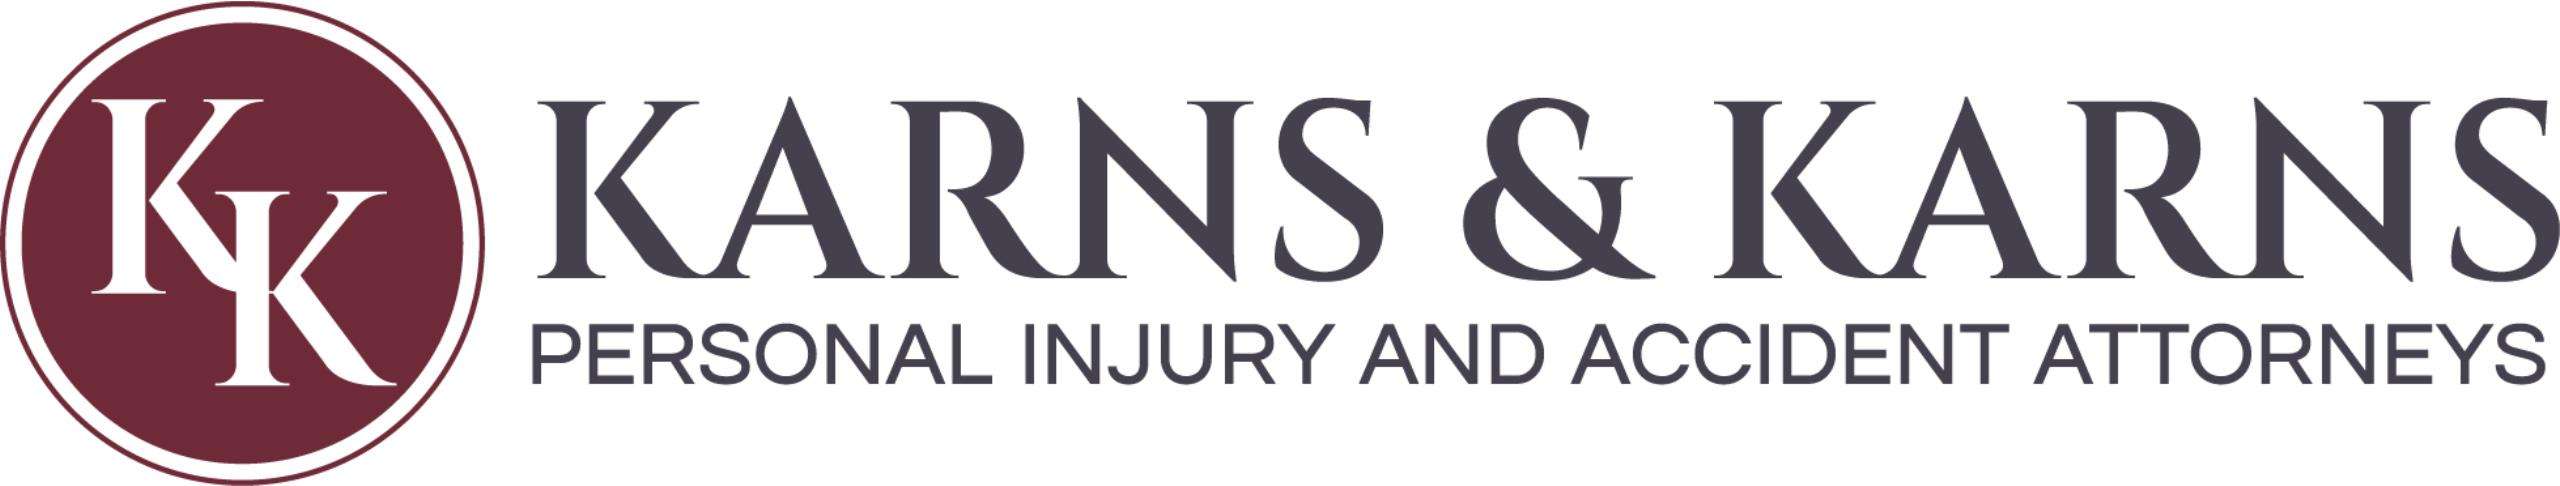 Karns & Karns Personal Injury and Accident Attorneys Logo